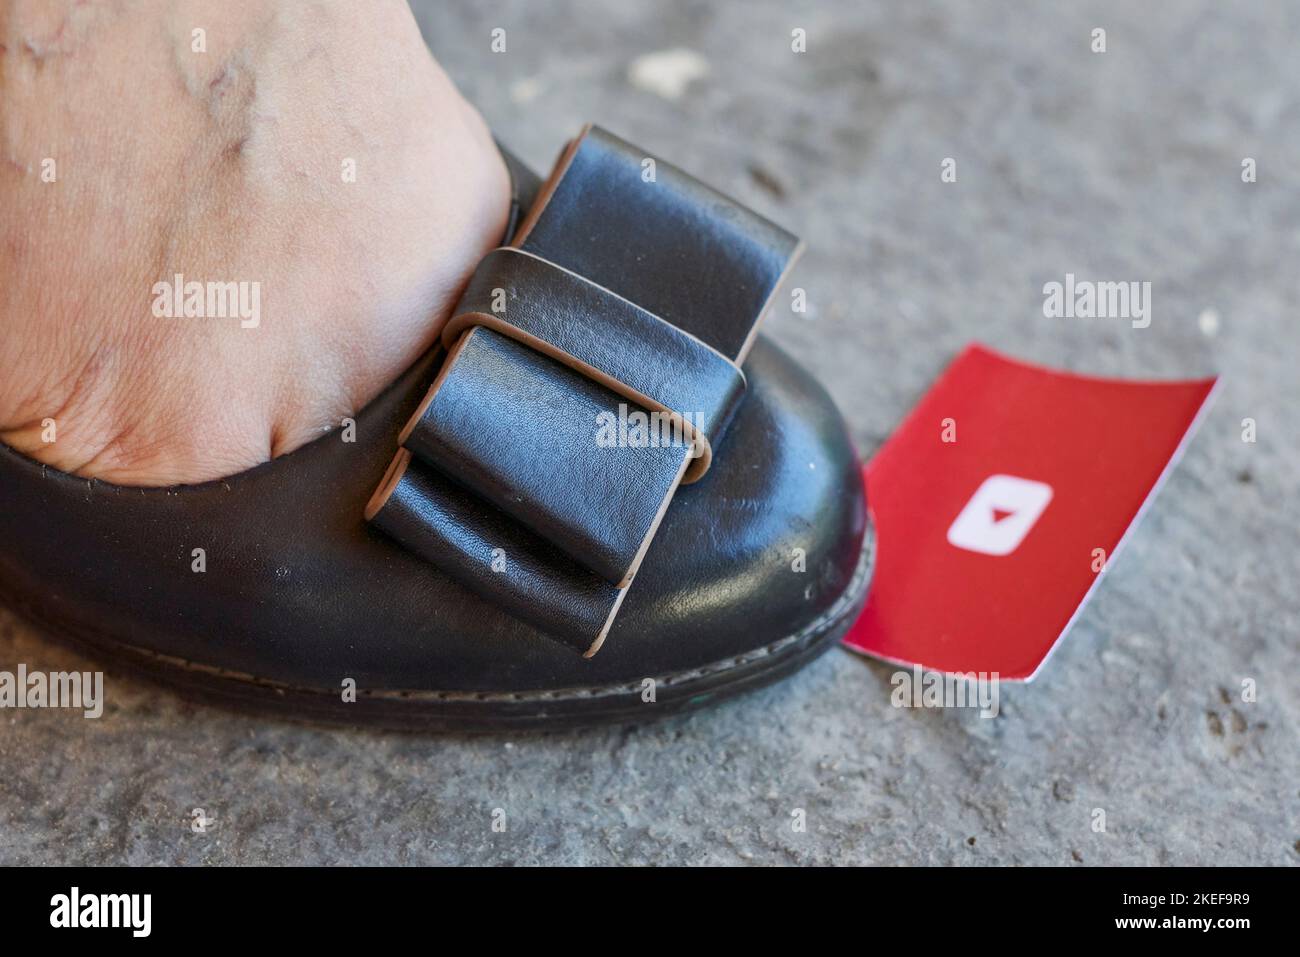 someone's foot with a red card stuck to the bottom of their shoe, which has been worn for several years Stock Photo